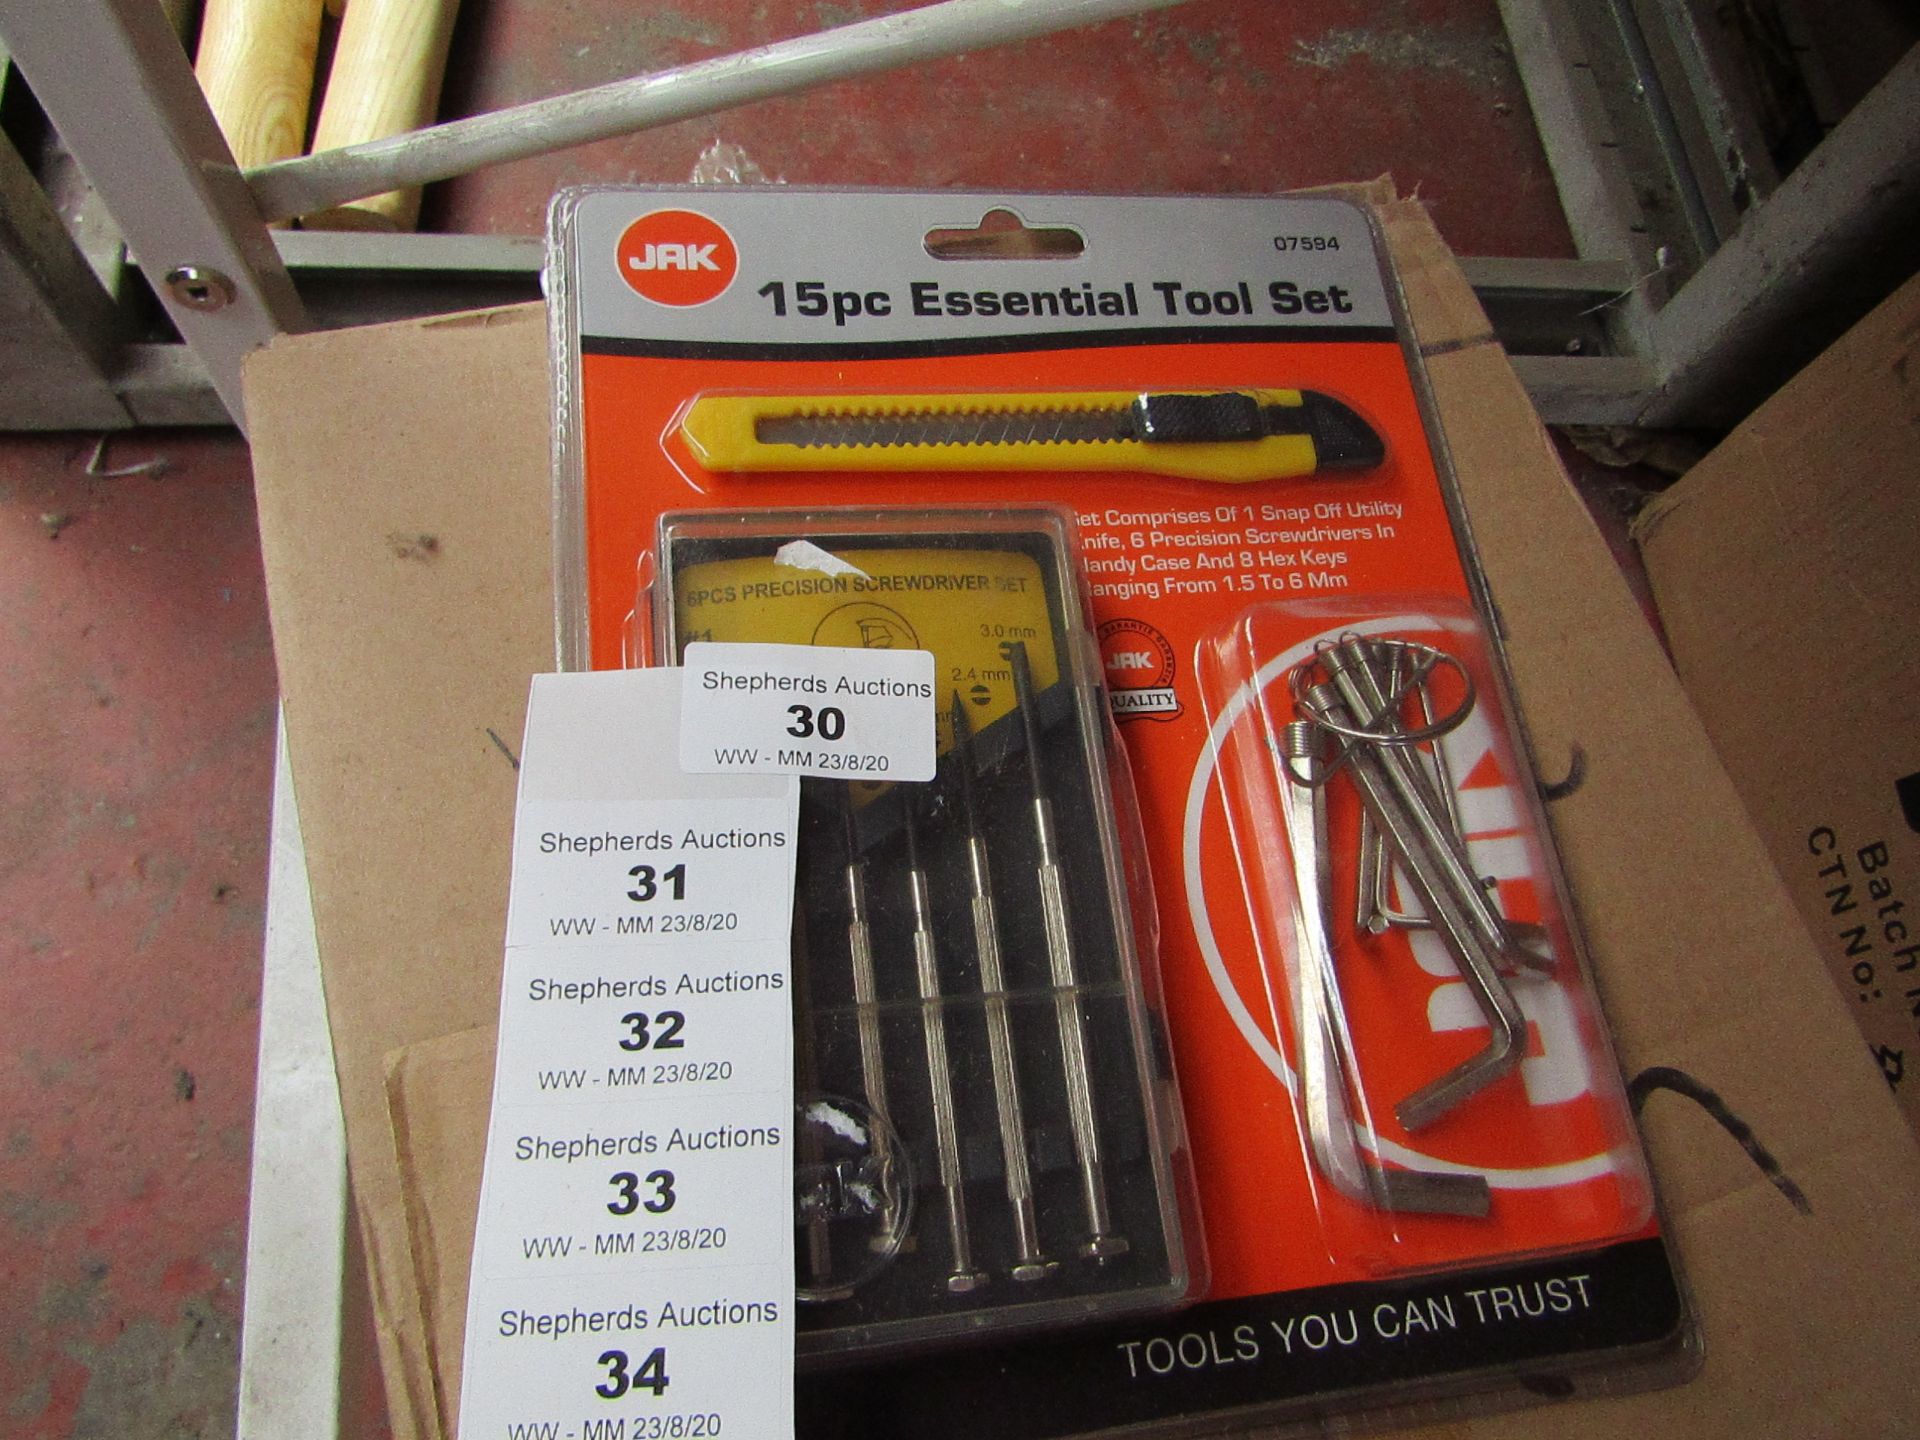 JAK - 15PC Essential Tool Set - New & Packaged.